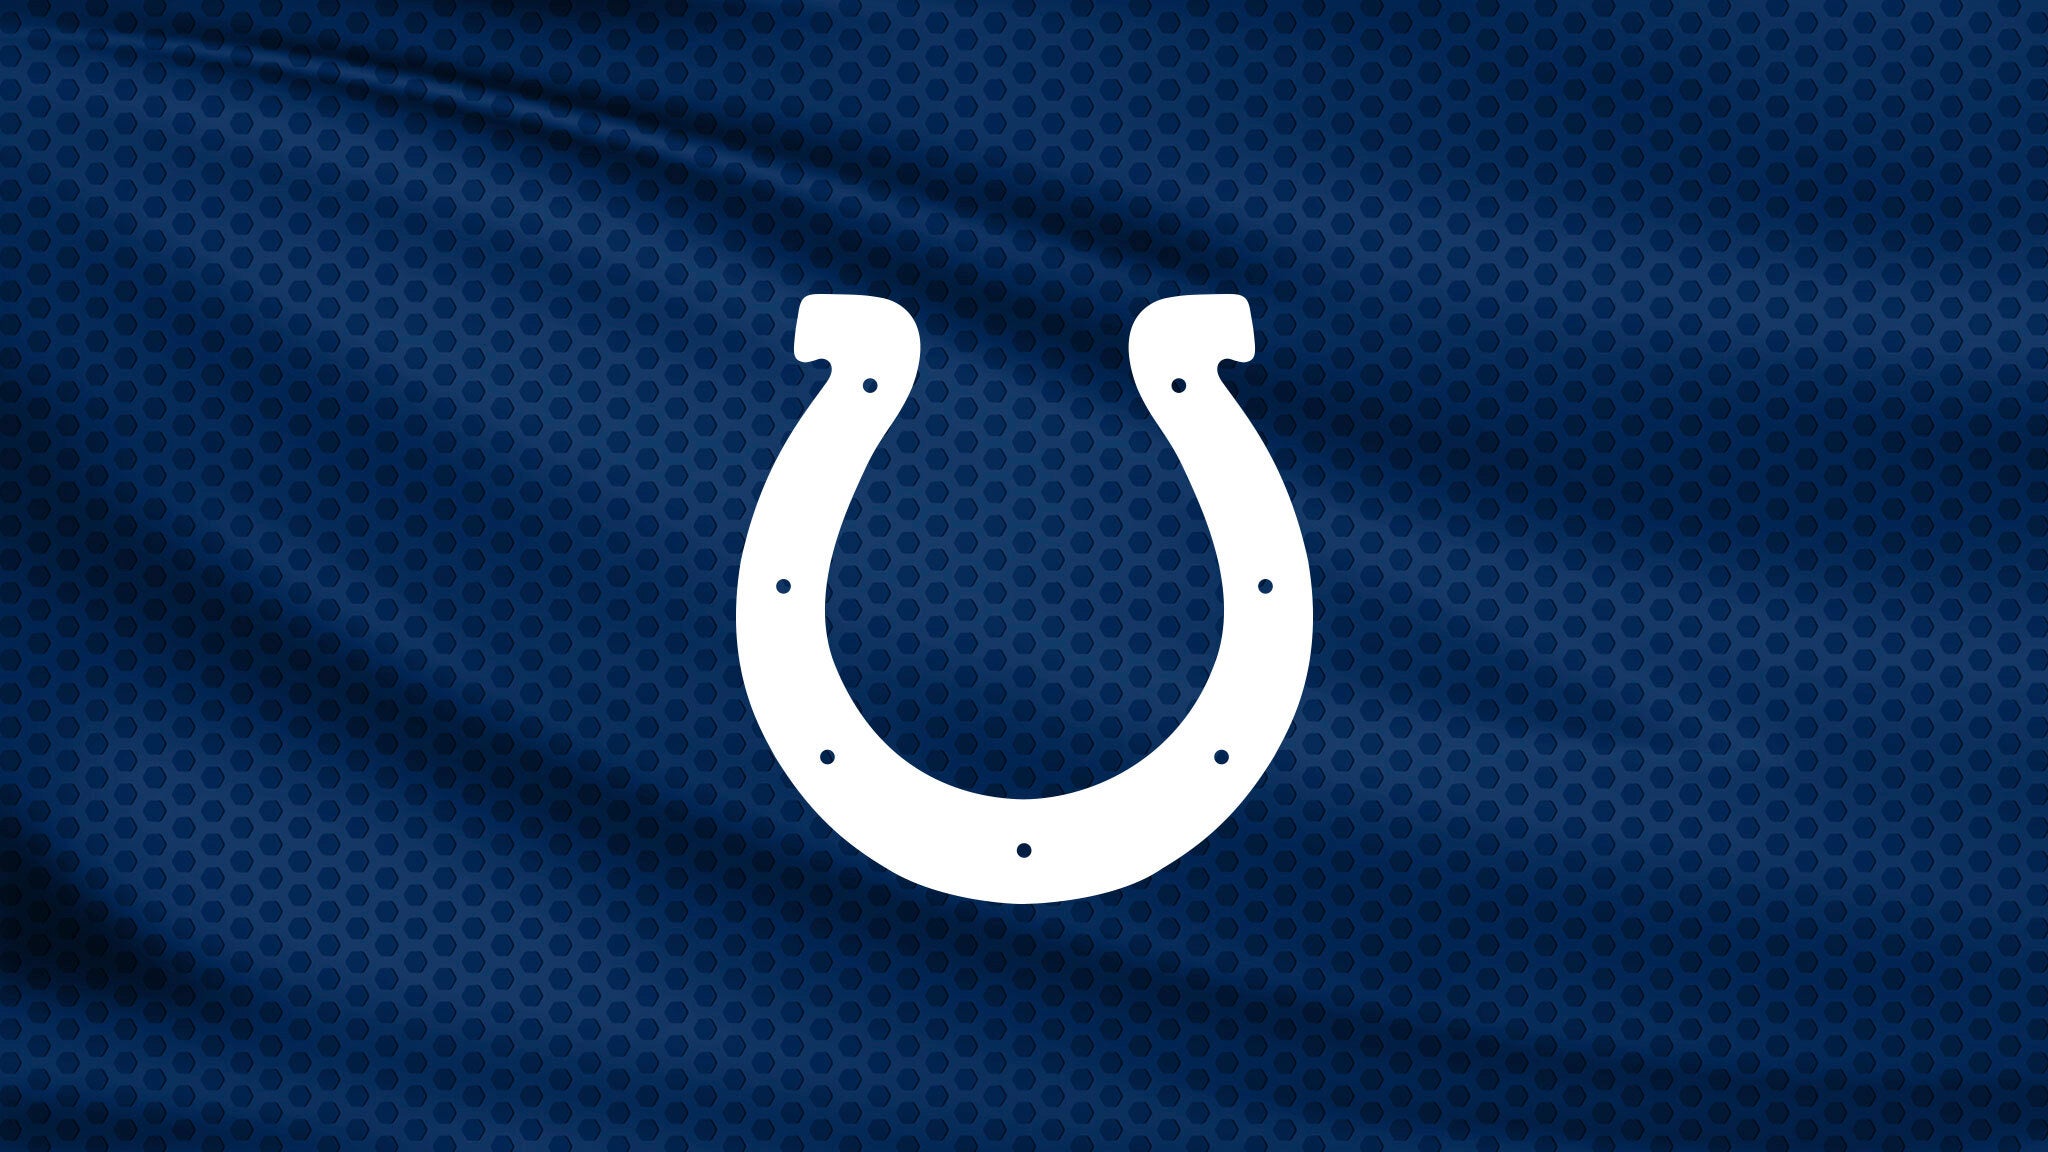 Indianapolis Colts vs. Pittsburgh Steelers hero